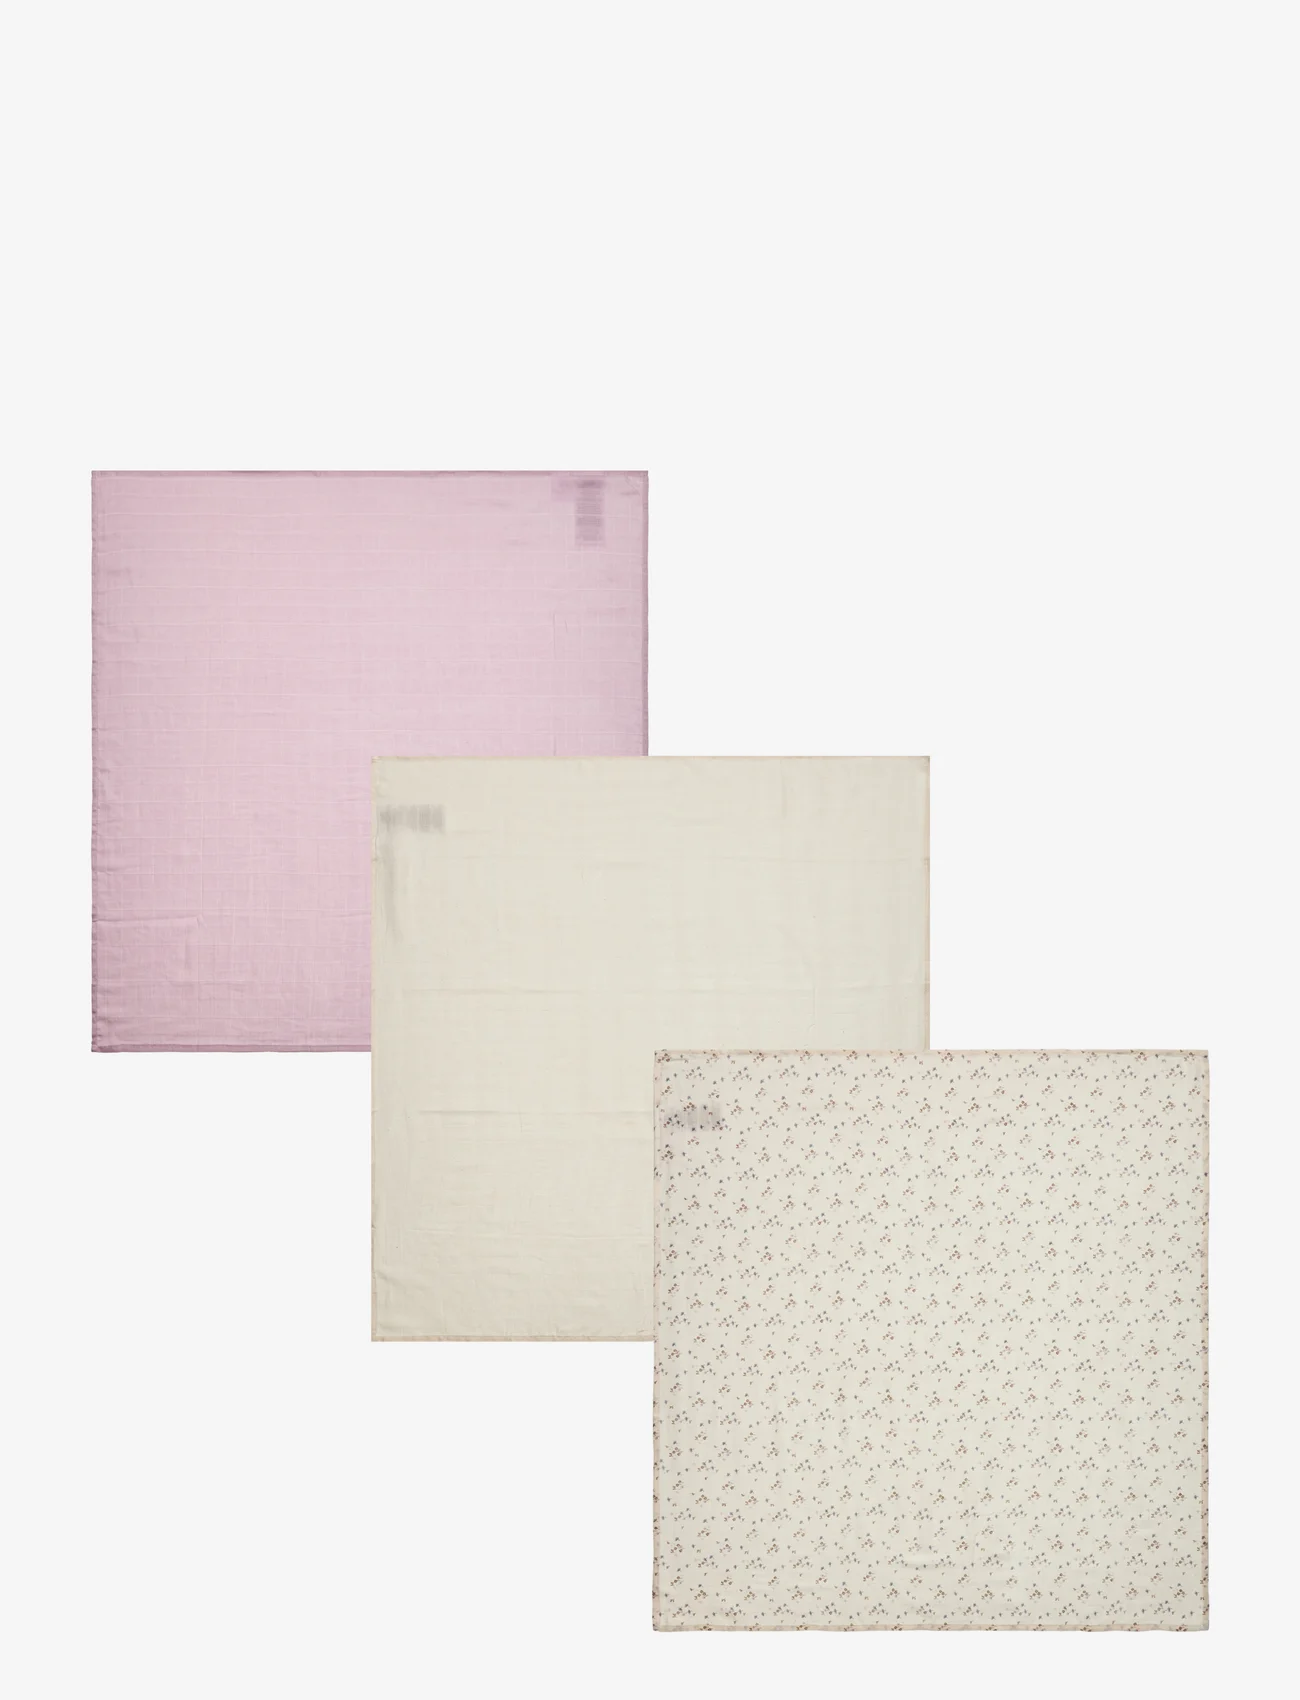 Pippi - Organic Muslin Cloth (3-pack) - stofbleer - burnished lilac - 0